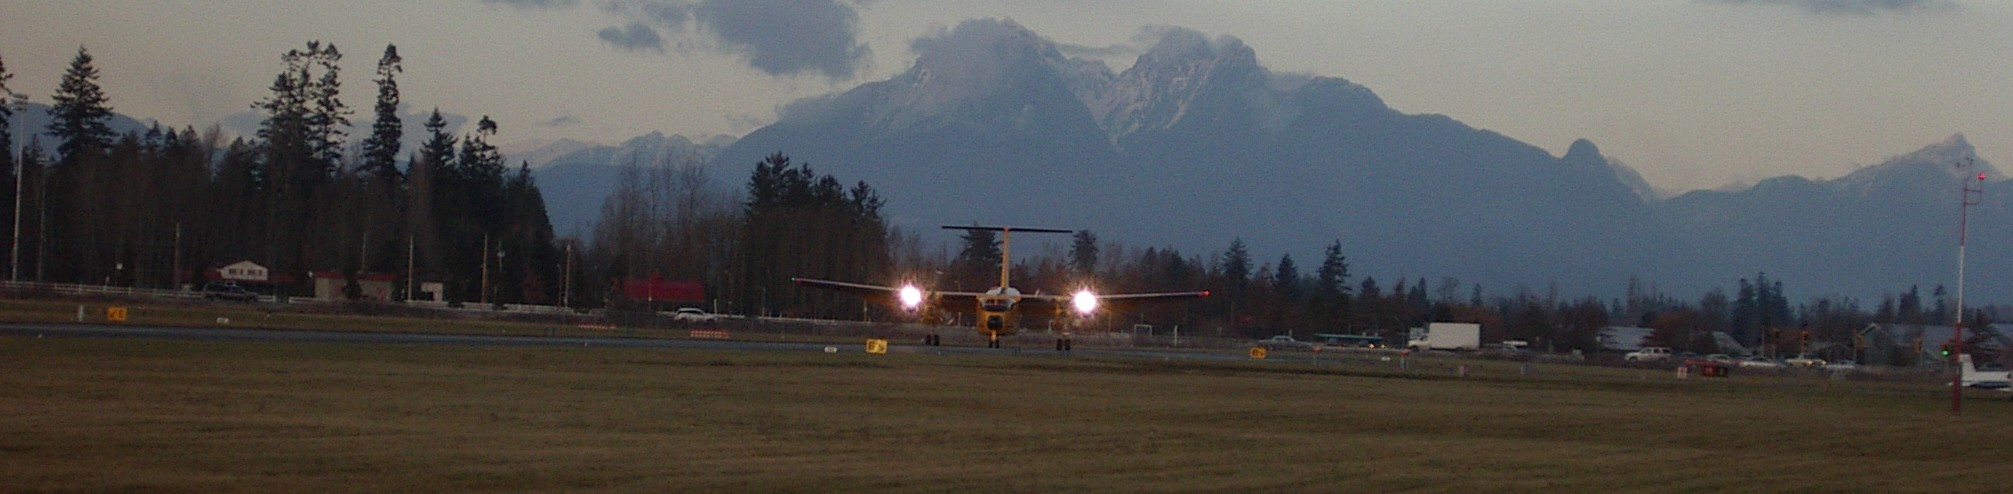 Canadian Airforce Buffallo, departing Langley Airport's Runway 19.  Langley Flying School.